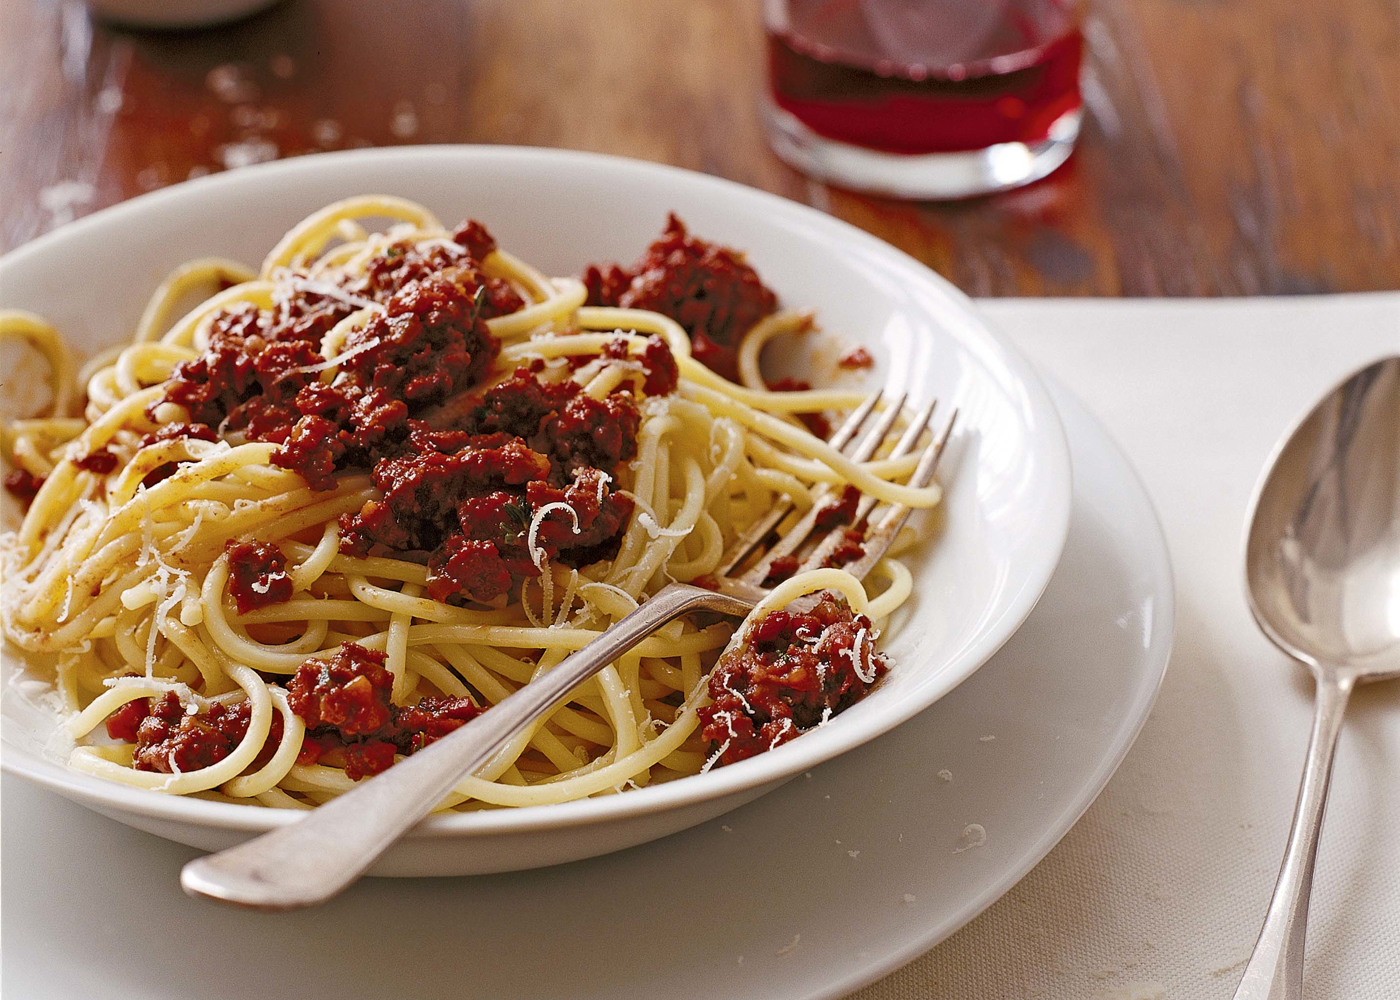 📷 Choose Between Normal or Pinterest Foods and We’ll Reveal If You Have a Male or Female Brain Spaghetti bolognese